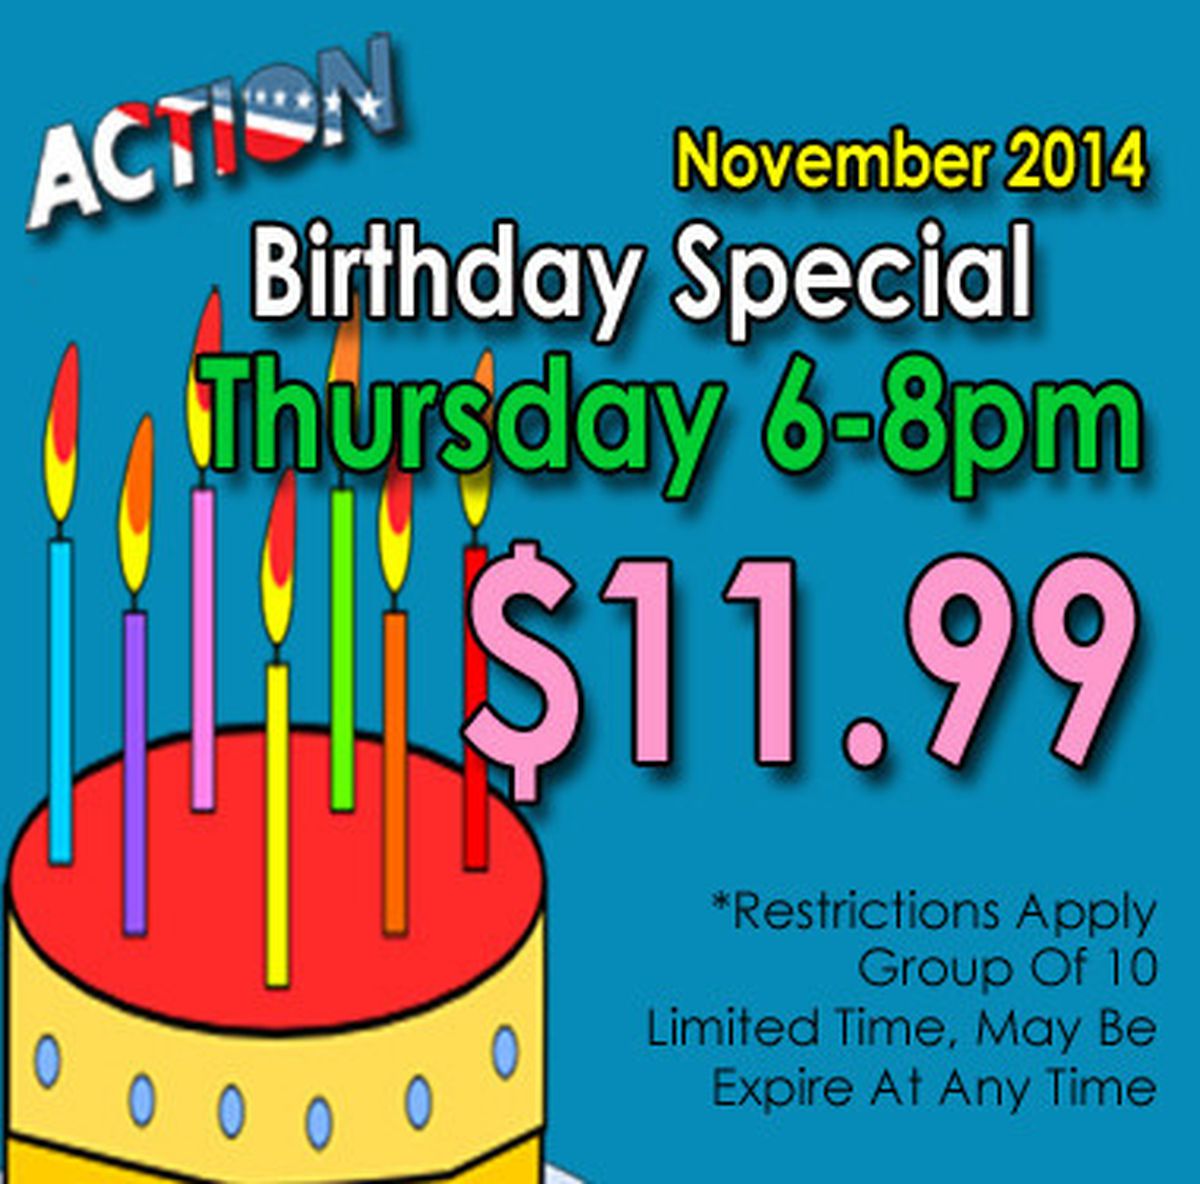 Areas Best Birthday Party Place, Kids Party Deals, Adult Birthday ...